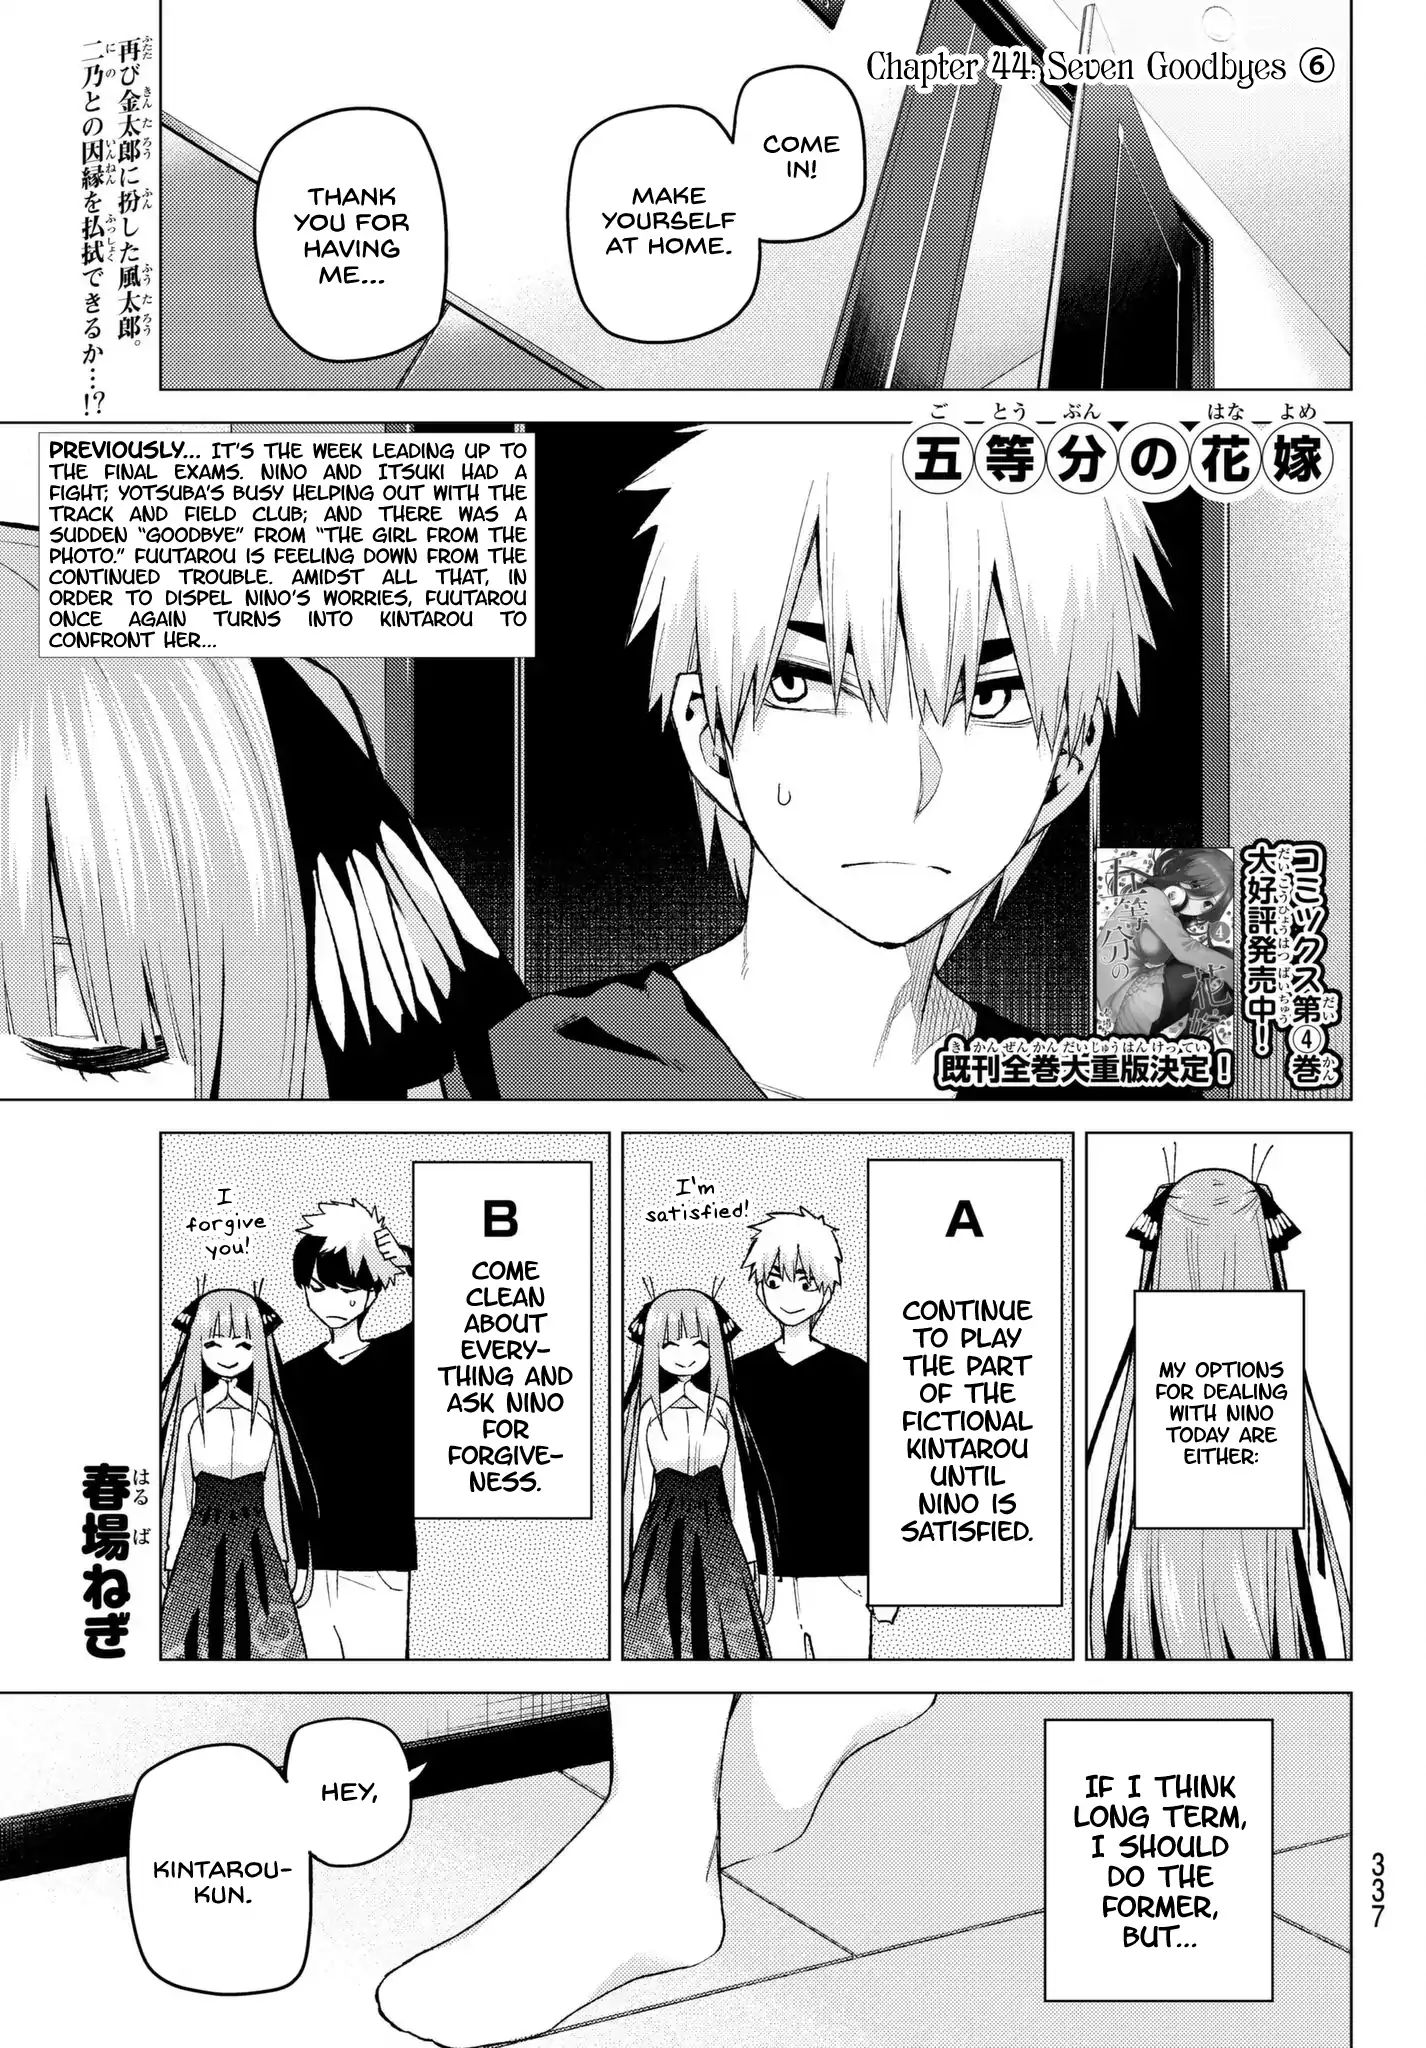 Go-Toubun No Hanayome Chapter 44: Seven Goodbyes ⑥ - Picture 1